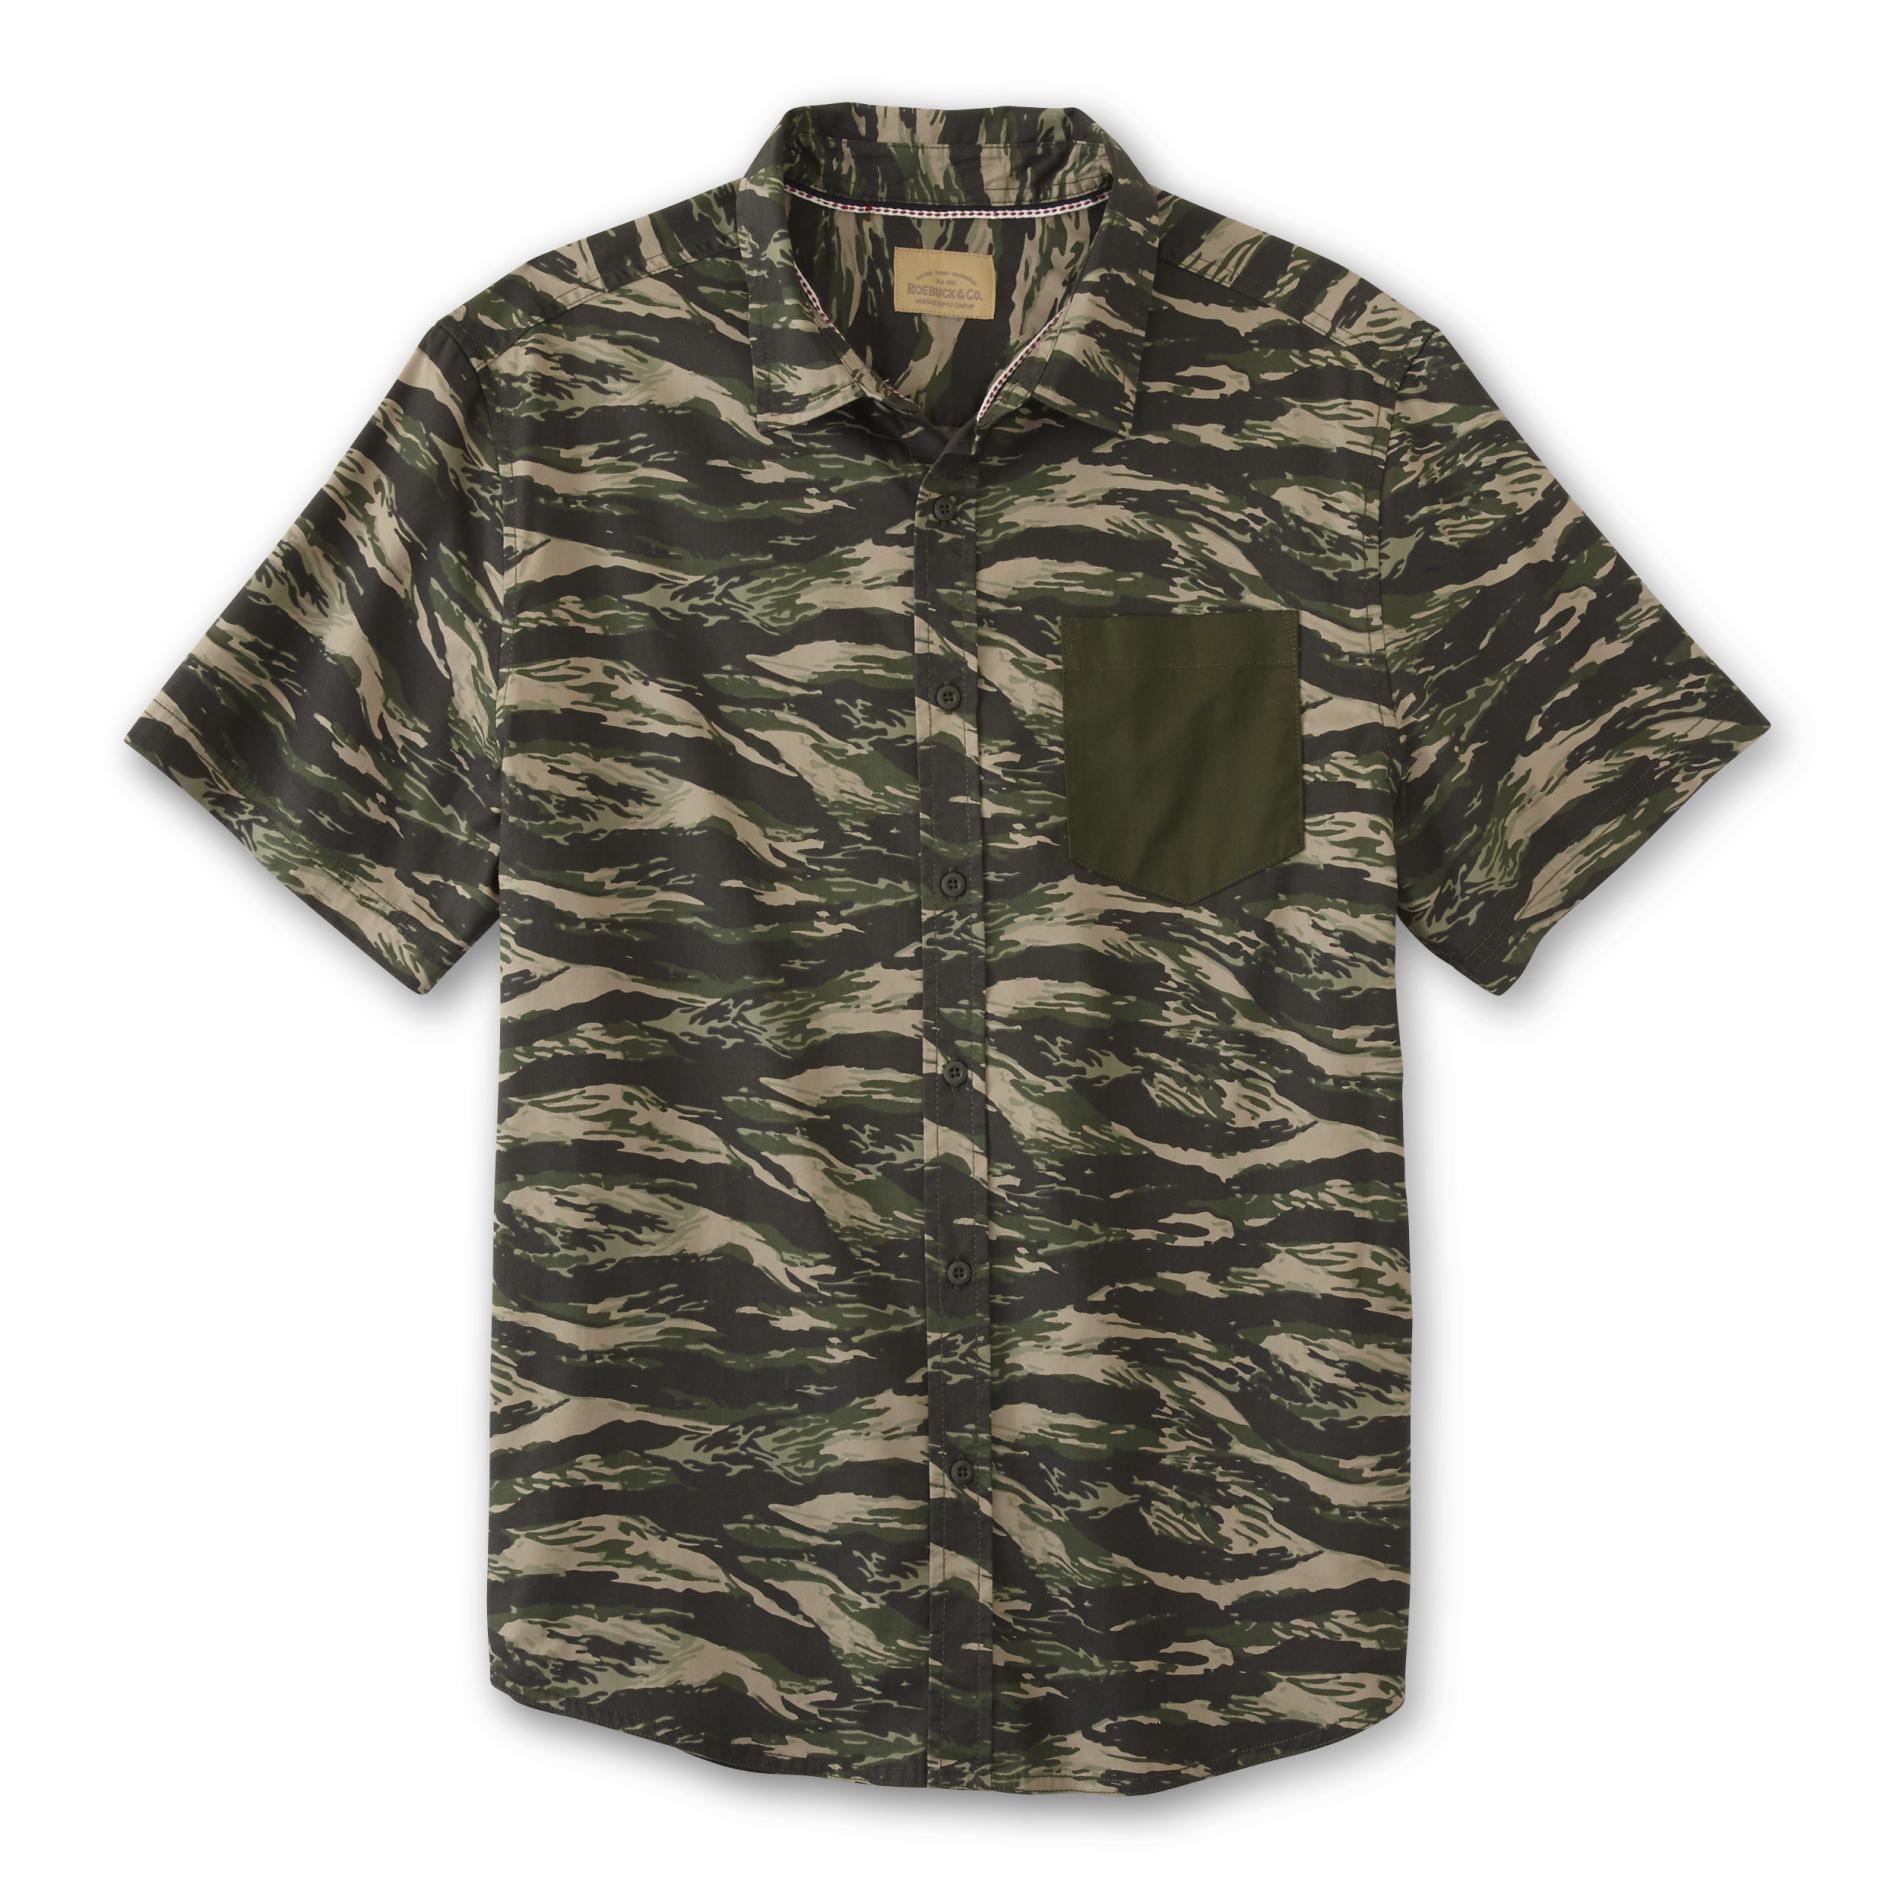 Roebuck & Co. Young Men's Short-Sleeve Shirt - Camouflage